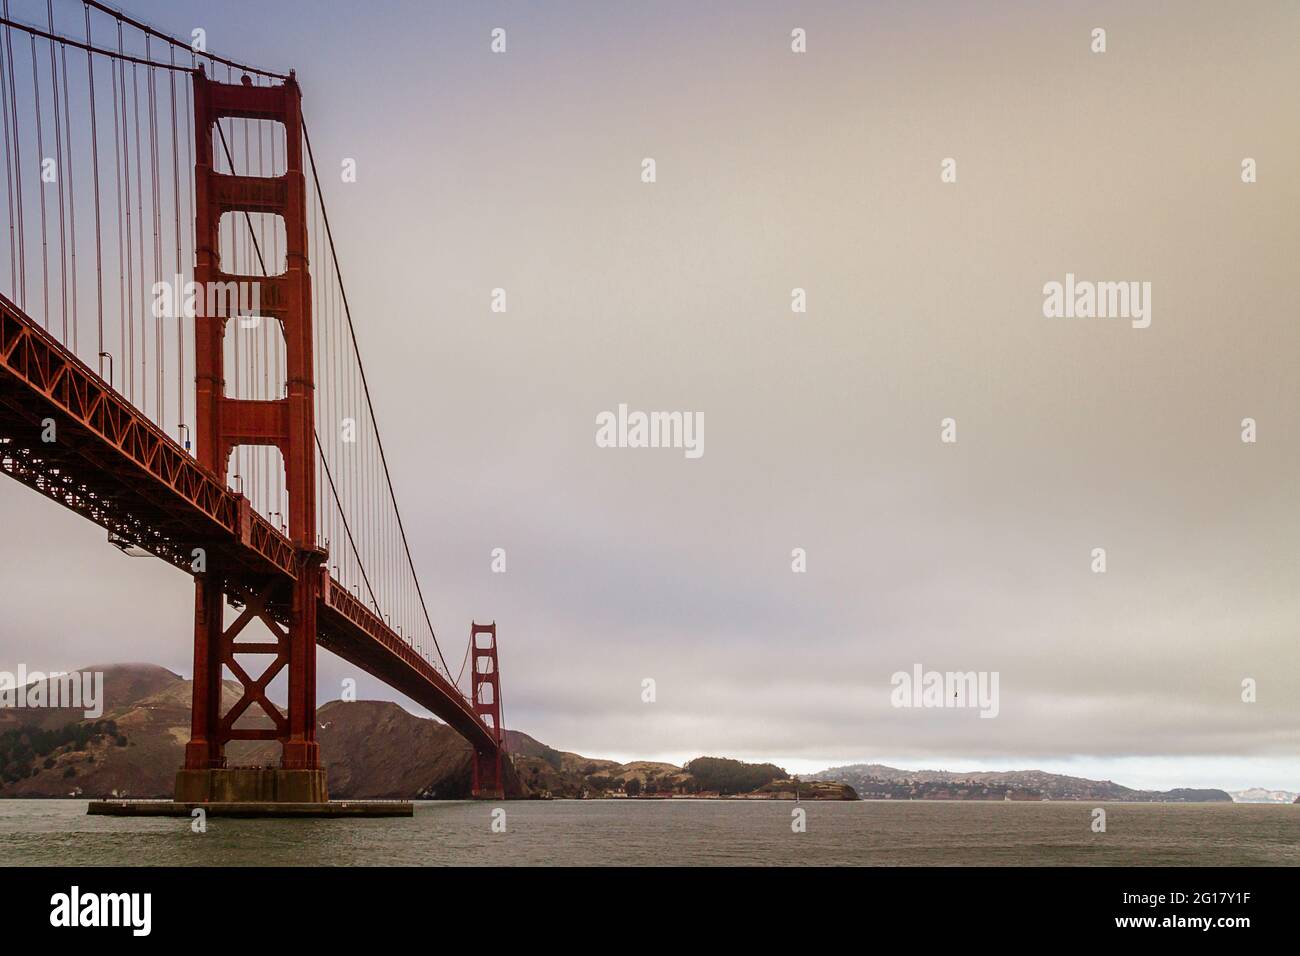 Wide angle image of the Golden Gate Bridge in San Francisco on a stormy day Stock Photo